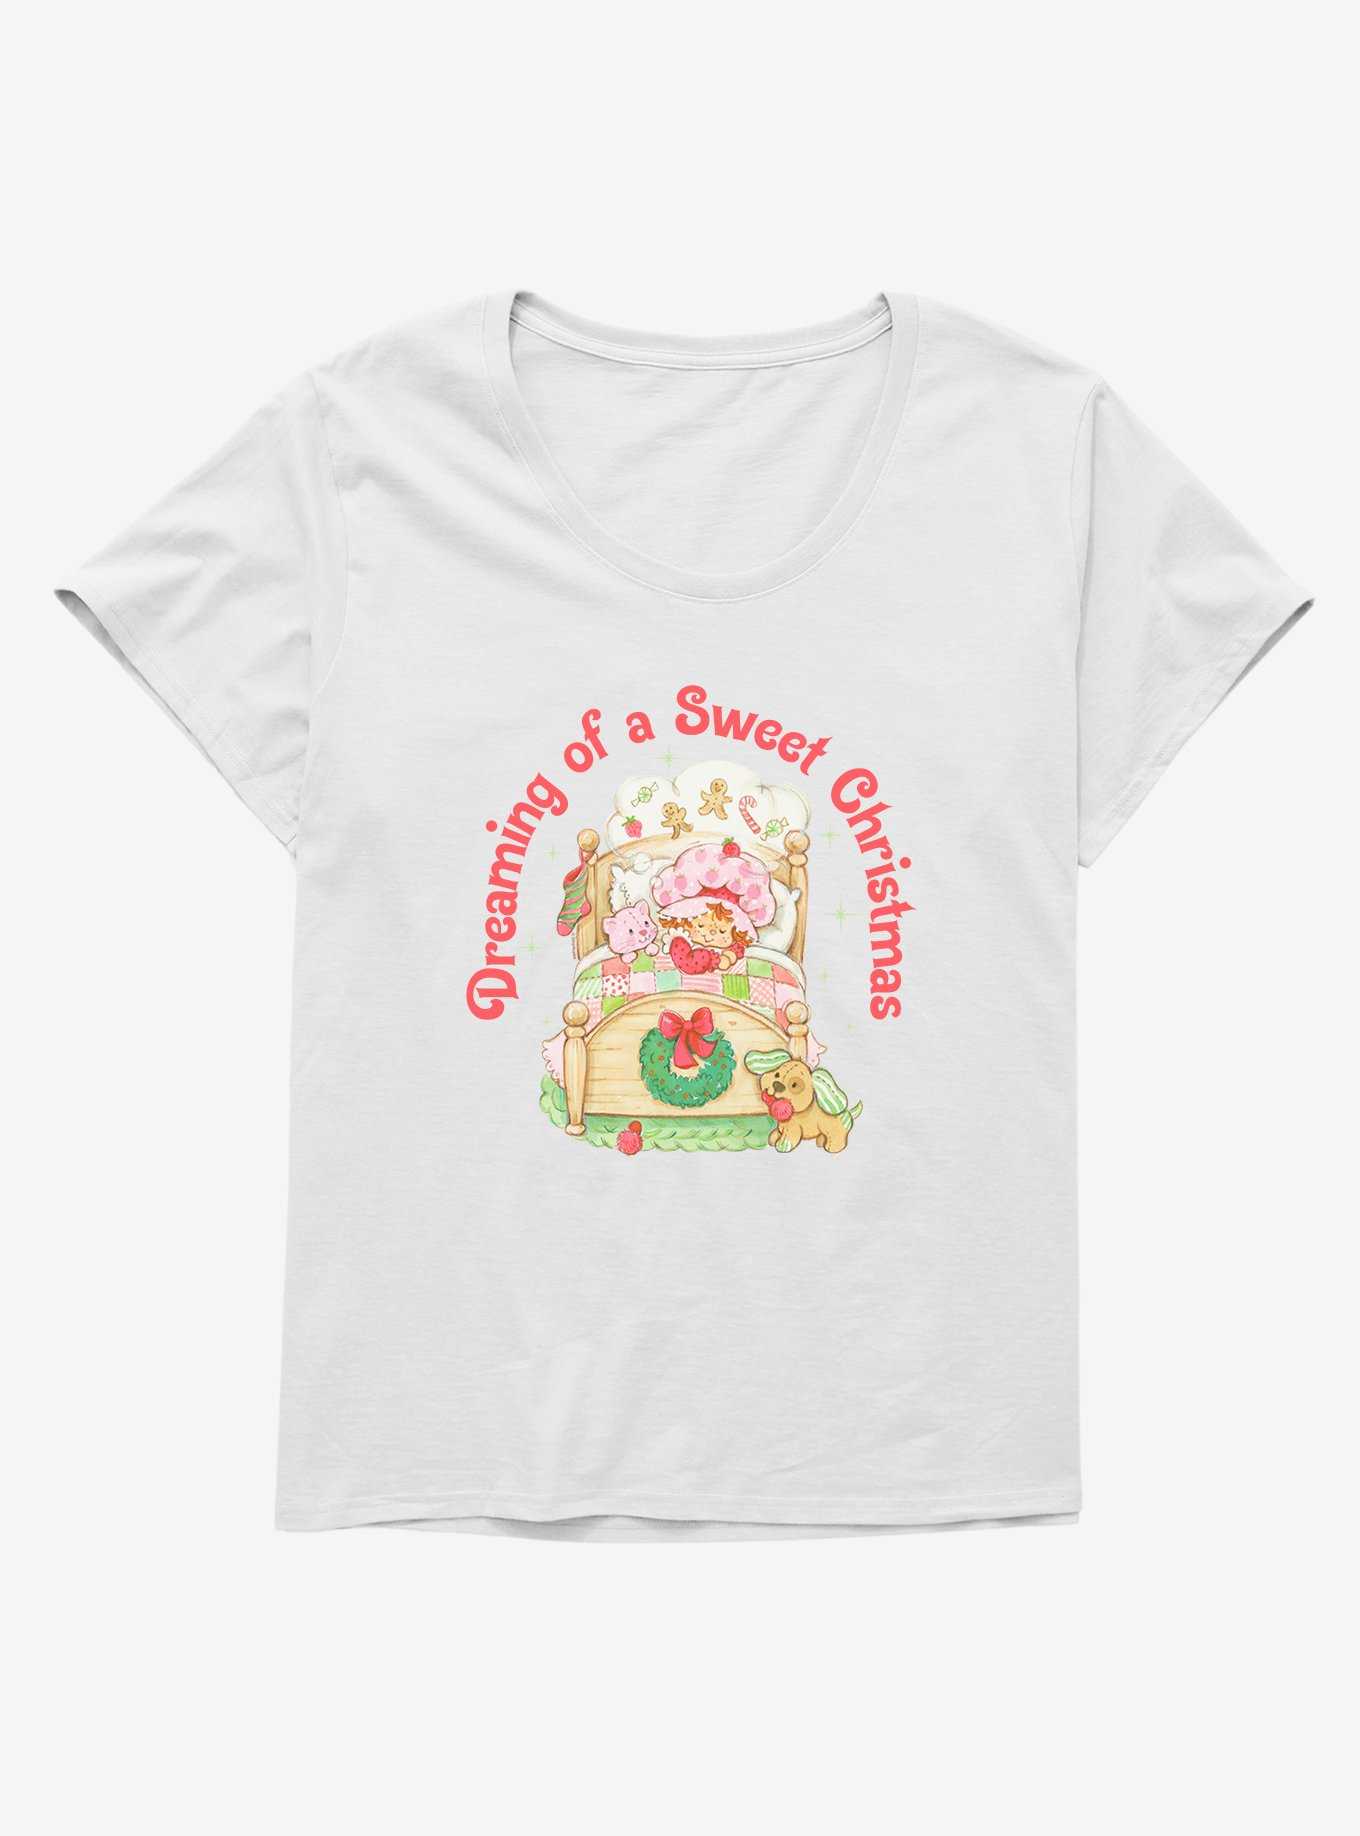 Strawberry Shortcake Dreaming Of A Sweet Christmas Womens T-Shirt Plus Size, , hi-res